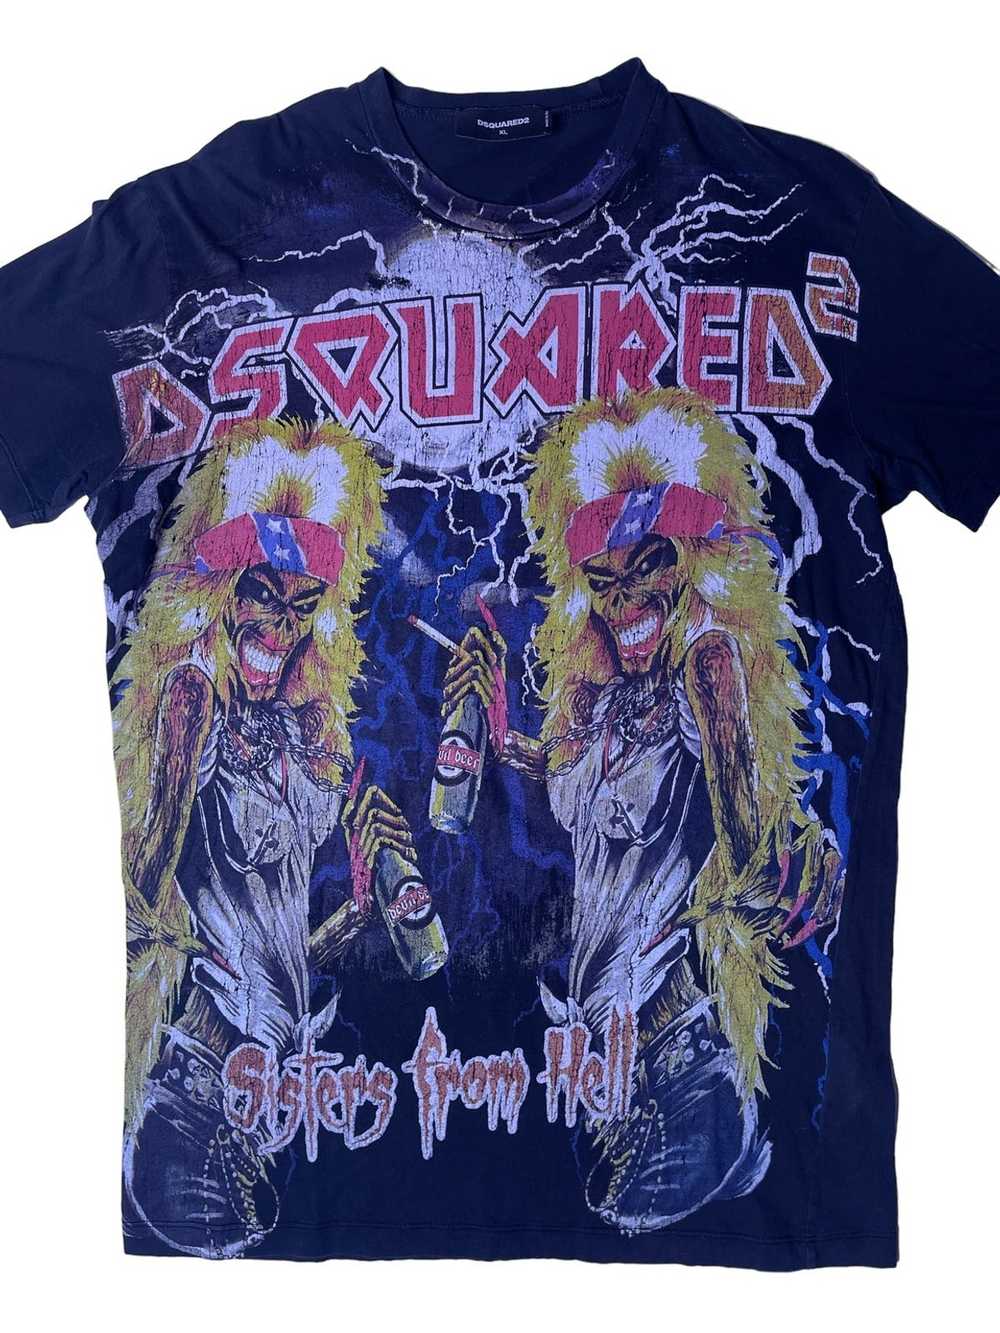 Dsquared2 Dsquared2 sisters from hell rock T shirt - image 4